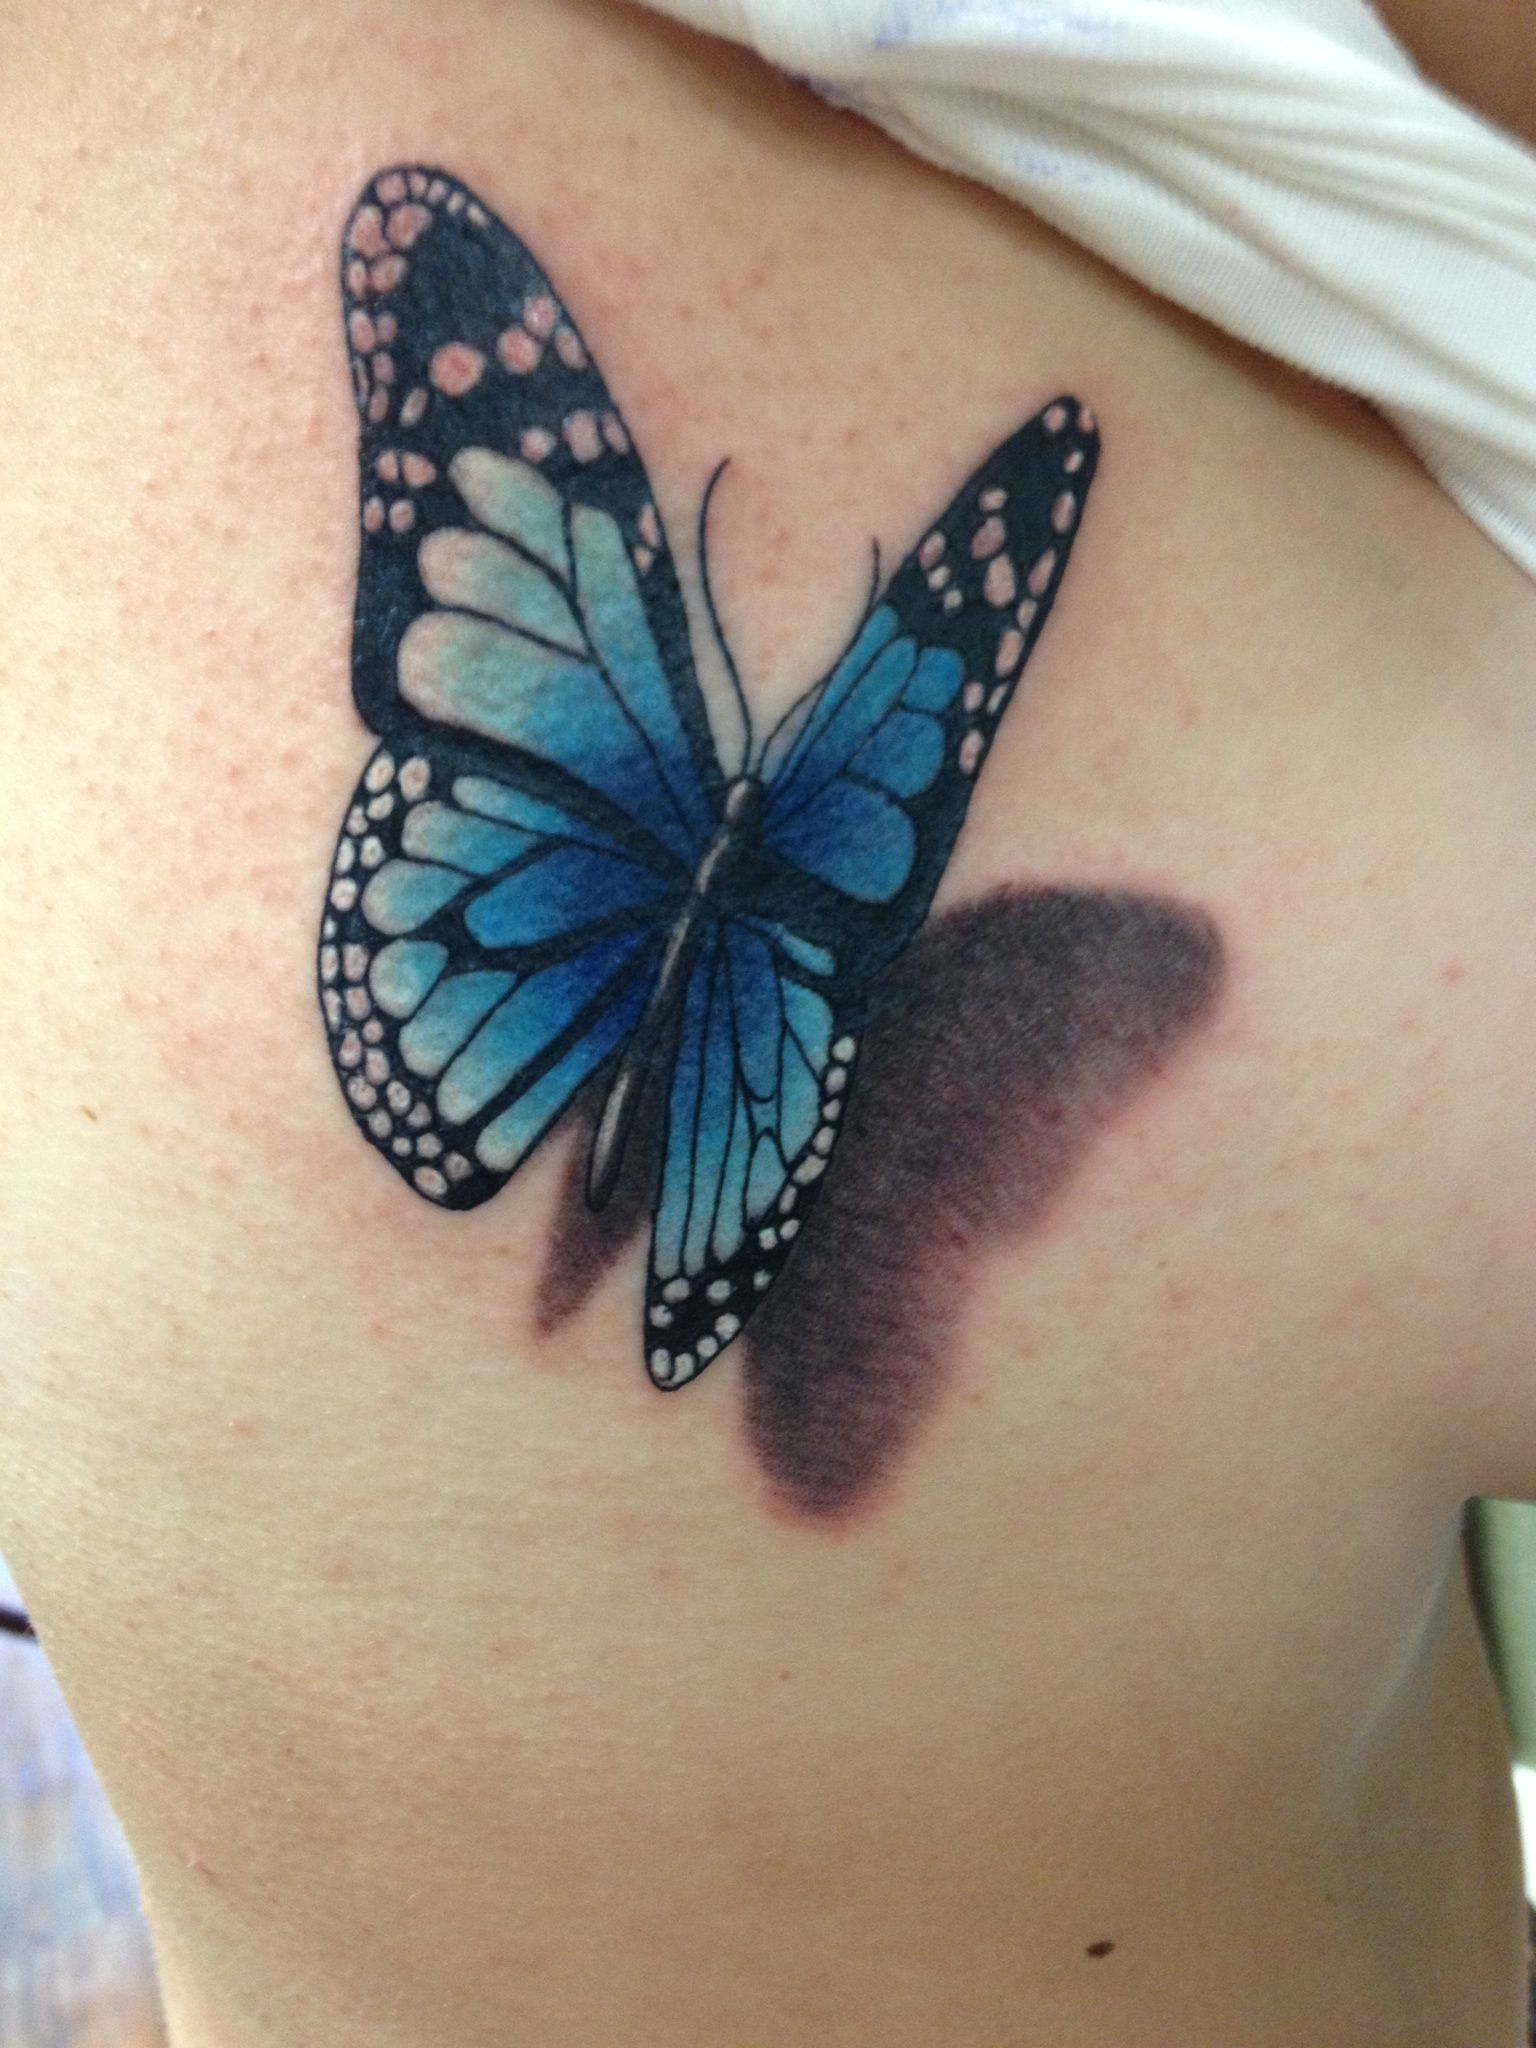 3d Butterfly Tattoo Courtesy Of Chris At Pretty In Ink Roseville Ca regarding dimensions 1536 X 2048